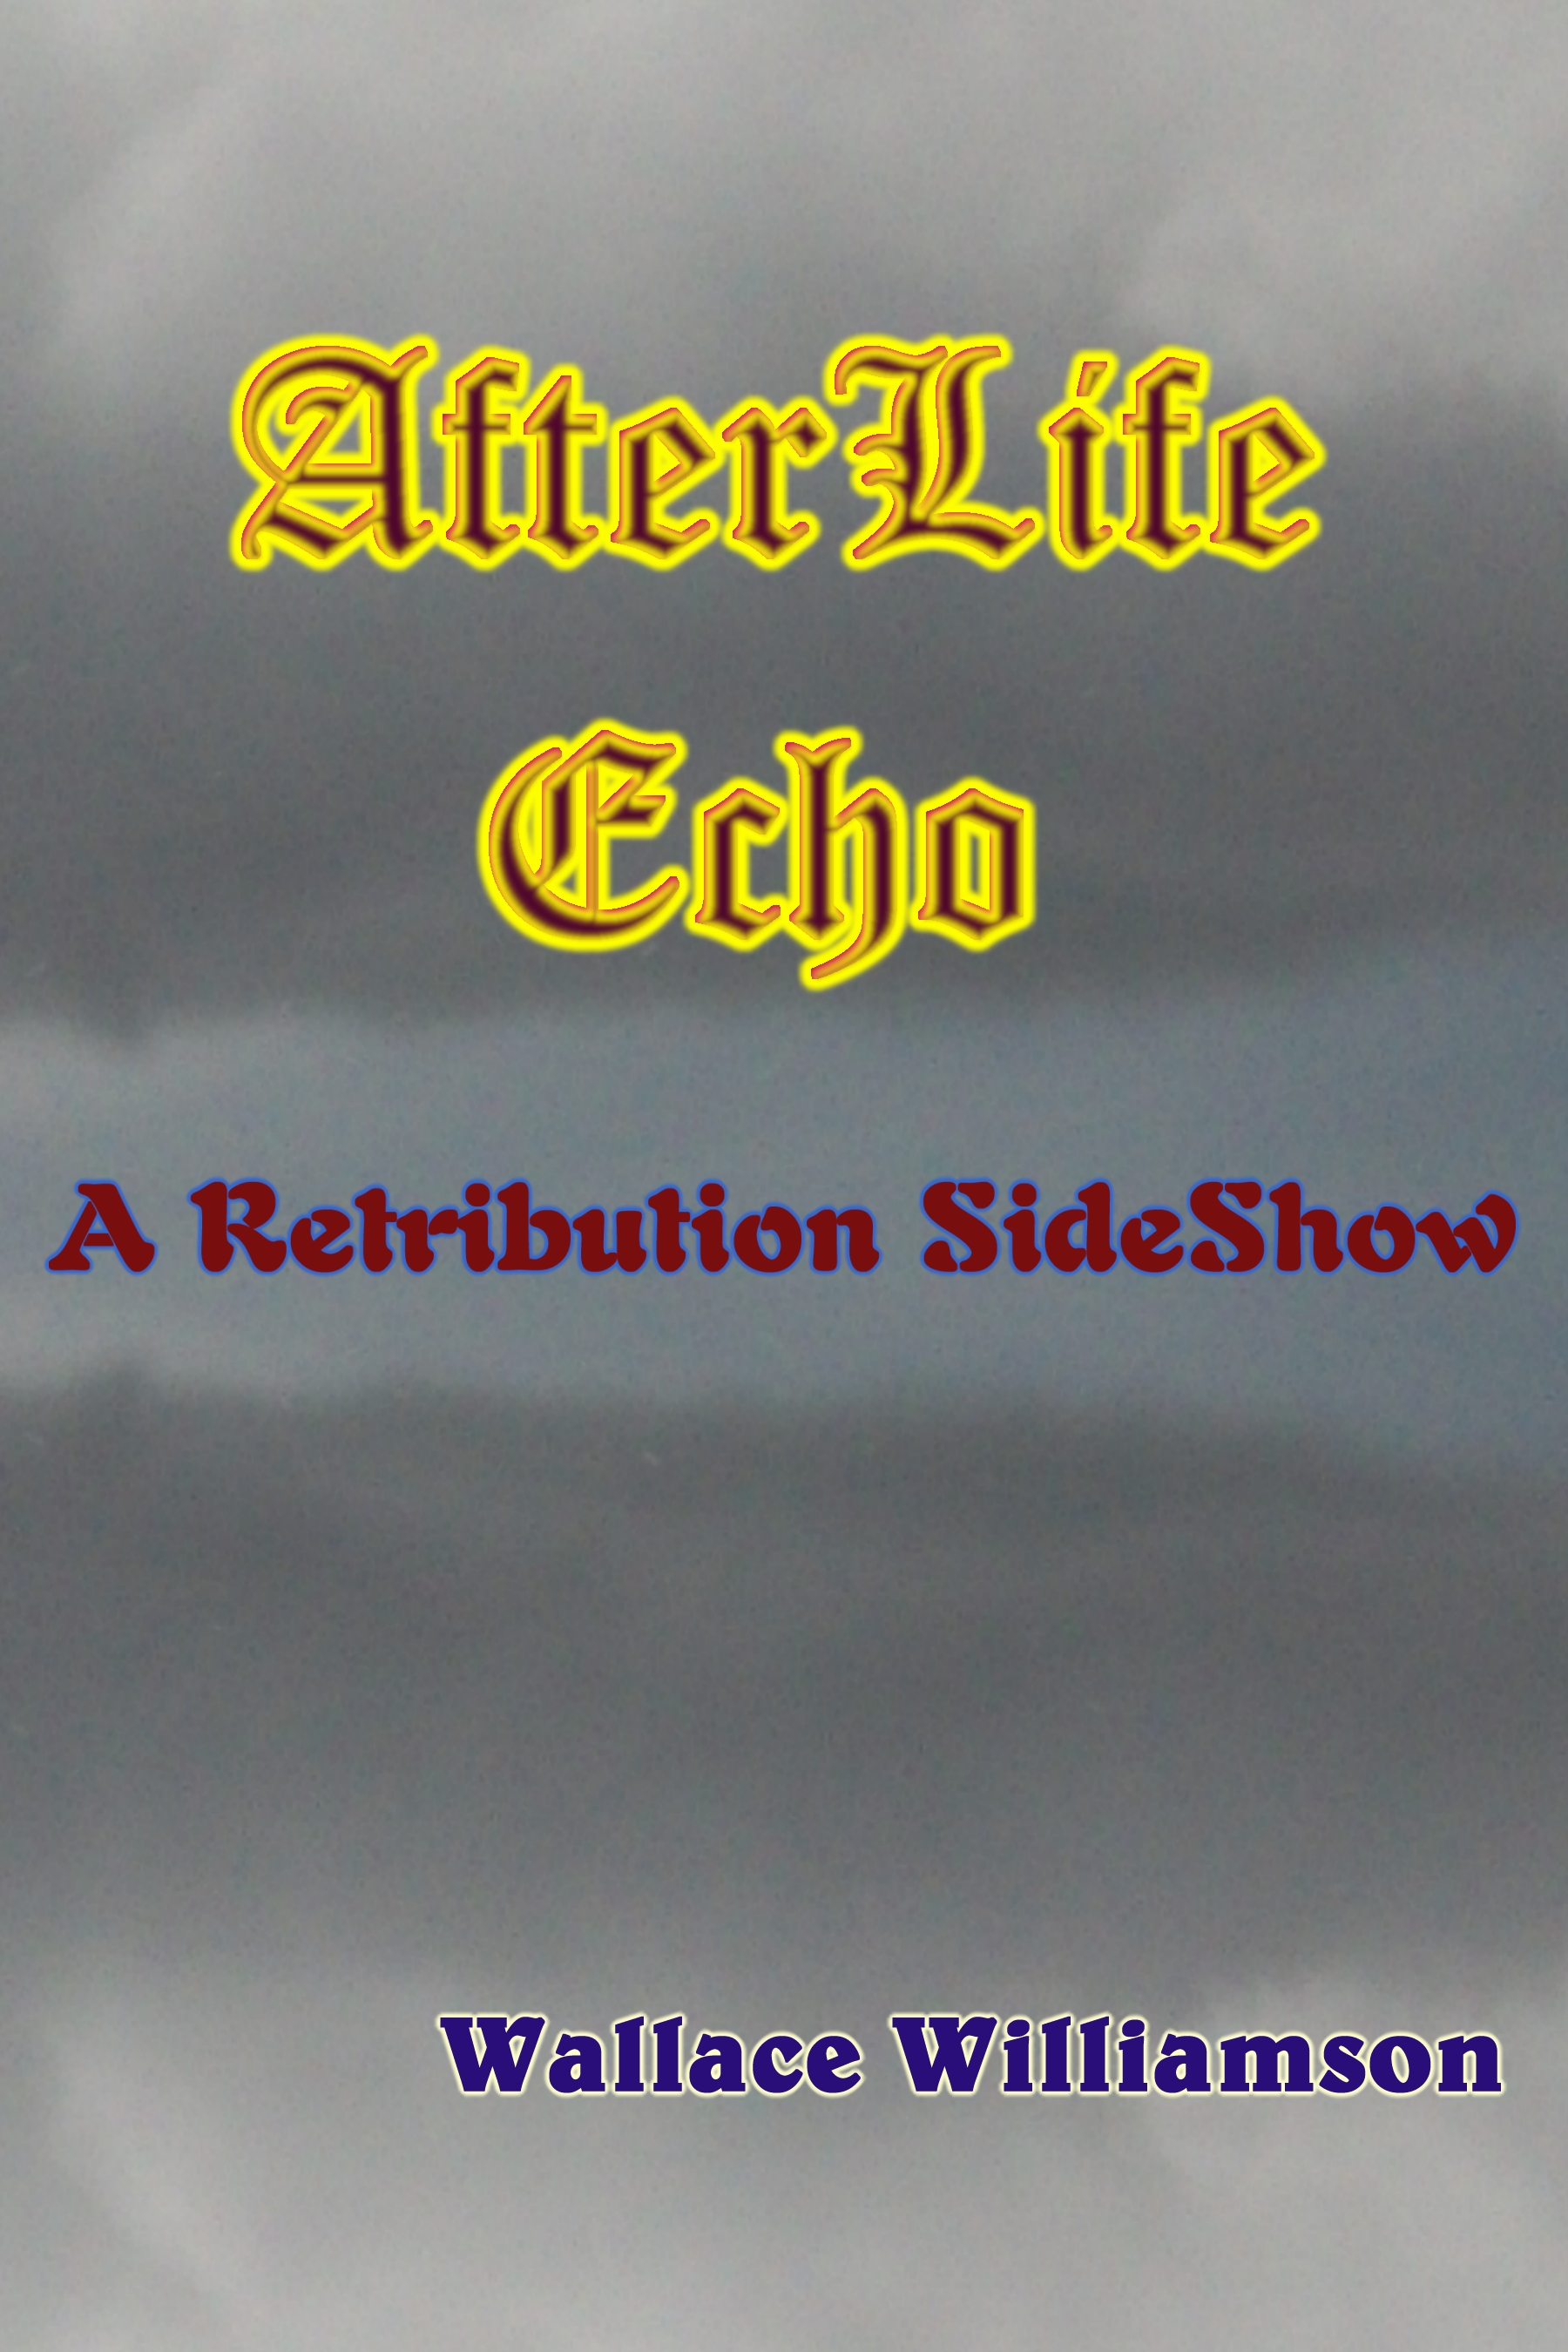 Click Here 4 AfterLife Echo @ Amazon!!!